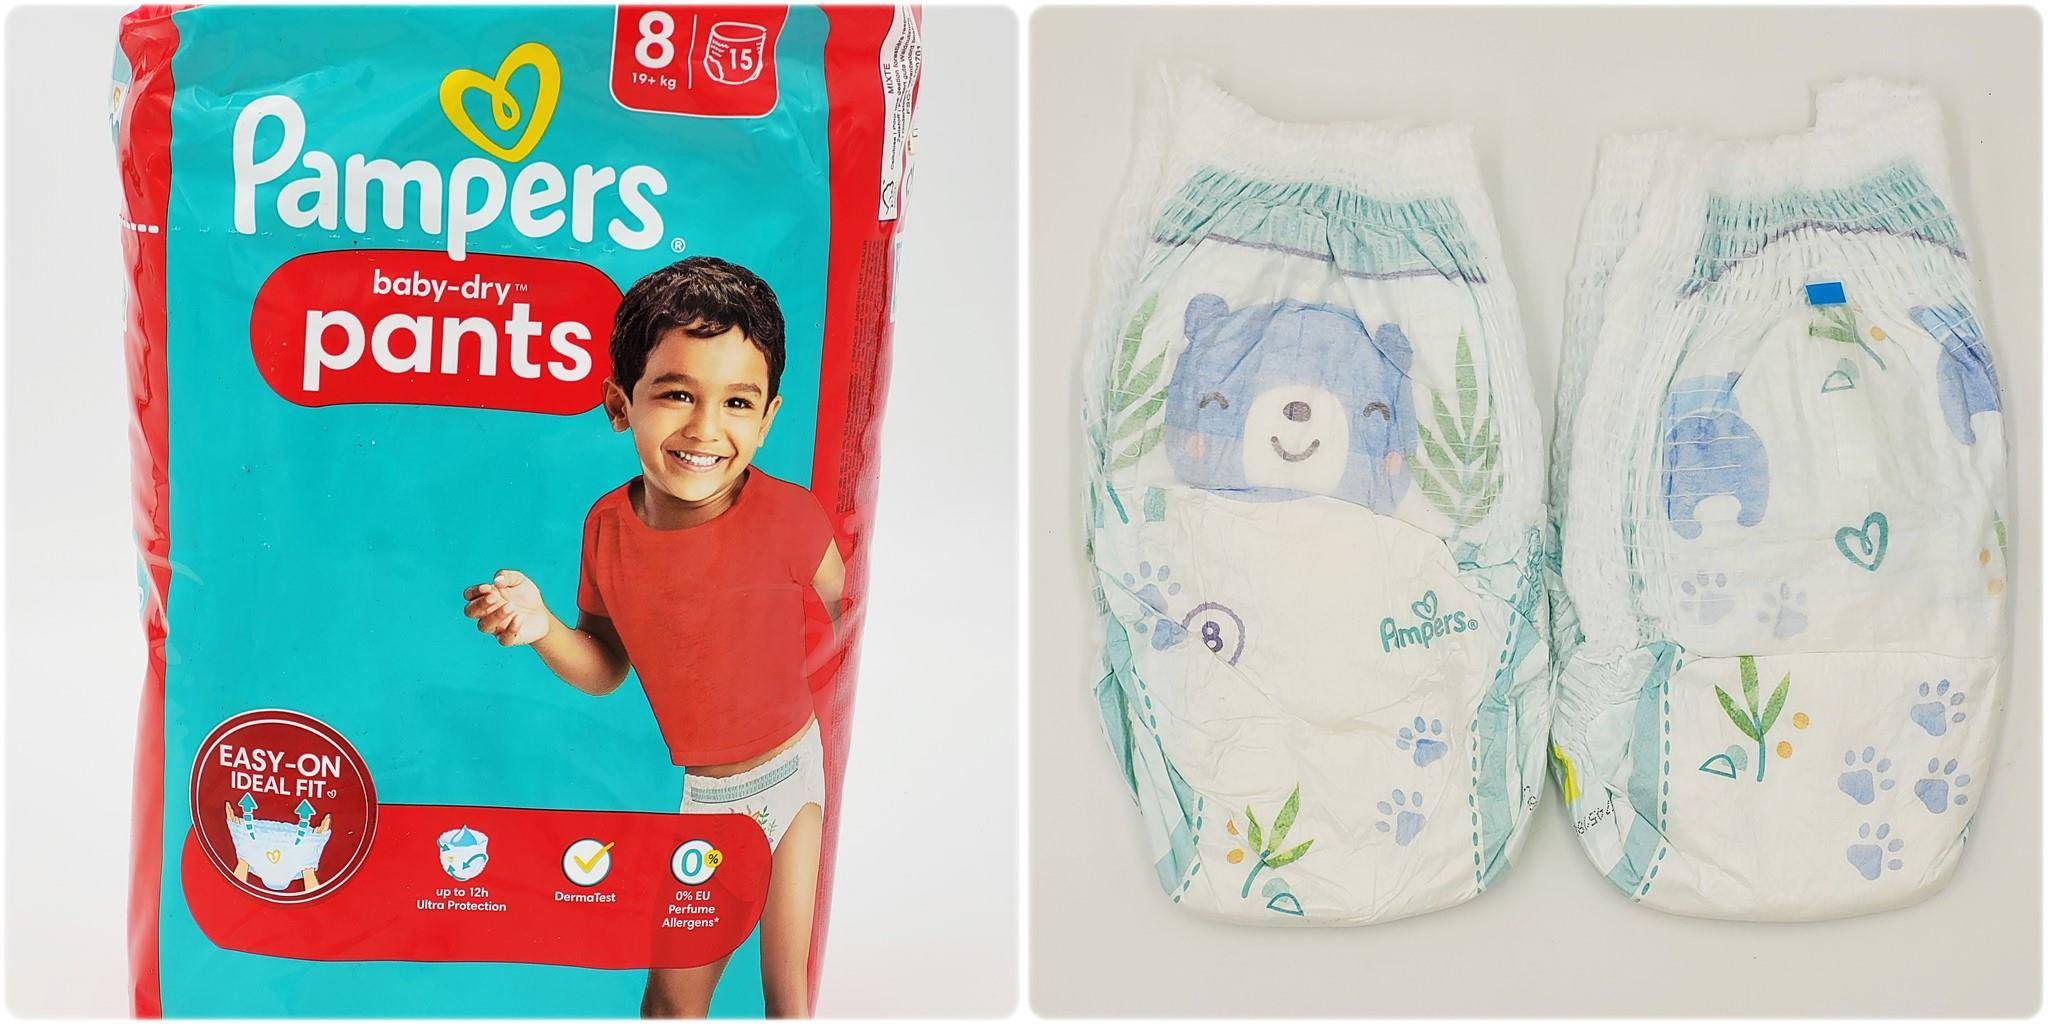 pampers splashers how to